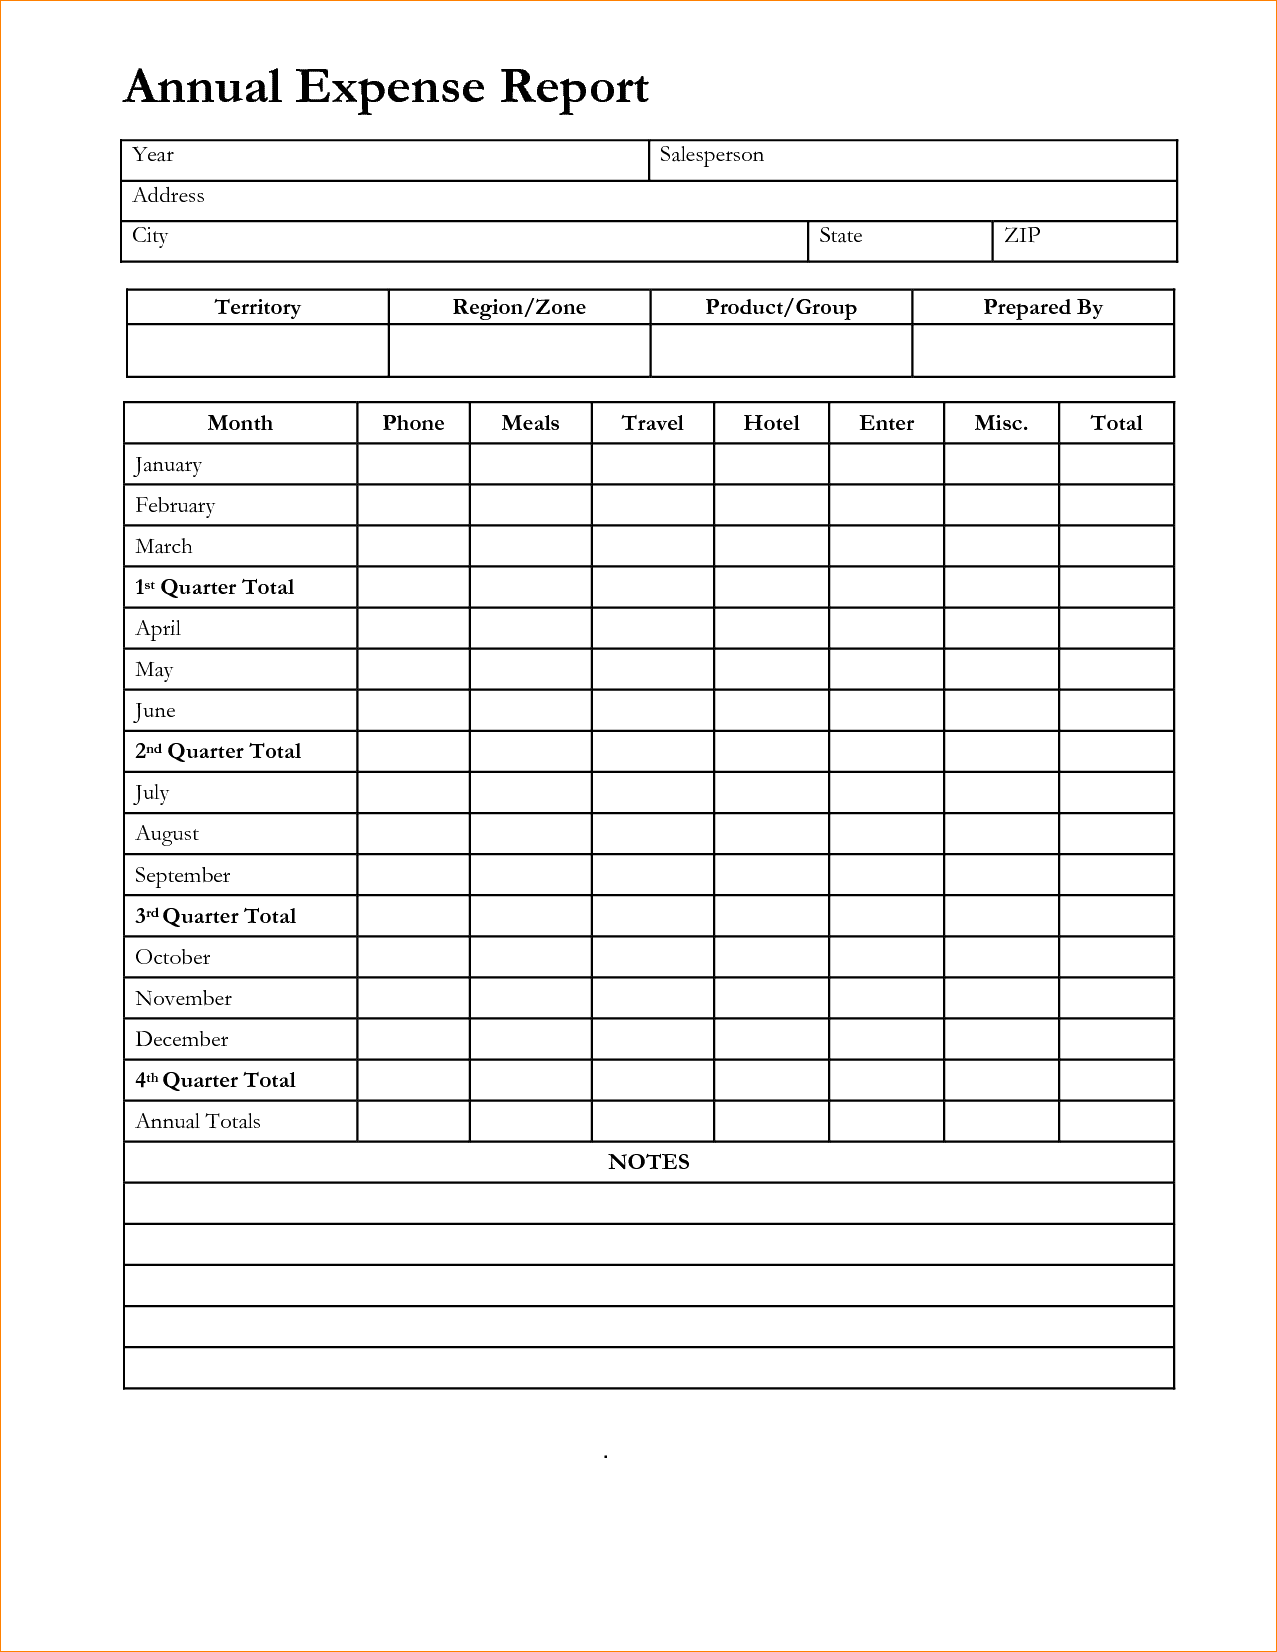 yearly-expense-report-template-spreadsheet-templates-for-busines-expense-report-form-expense